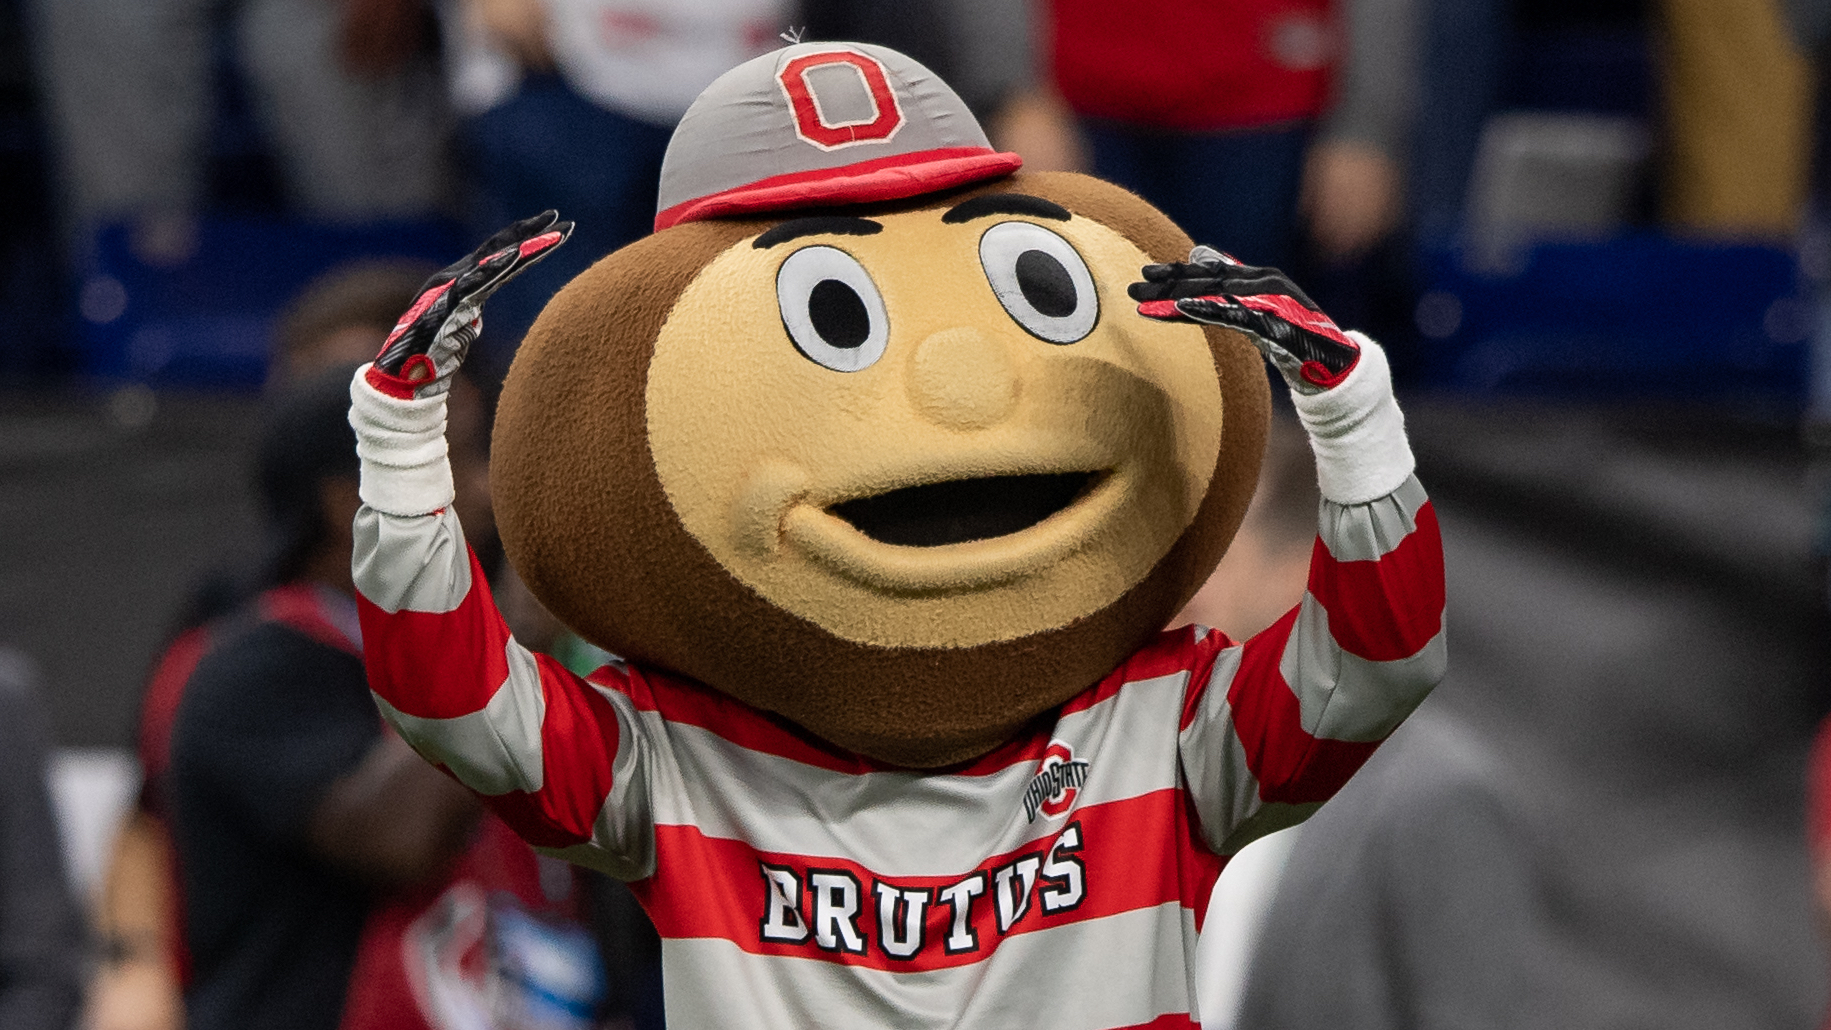 Ohio State vs. Indiana Odds, Promos: Bet $10, Win $200 if the Buckeyes Cover +50, and More! article feature image